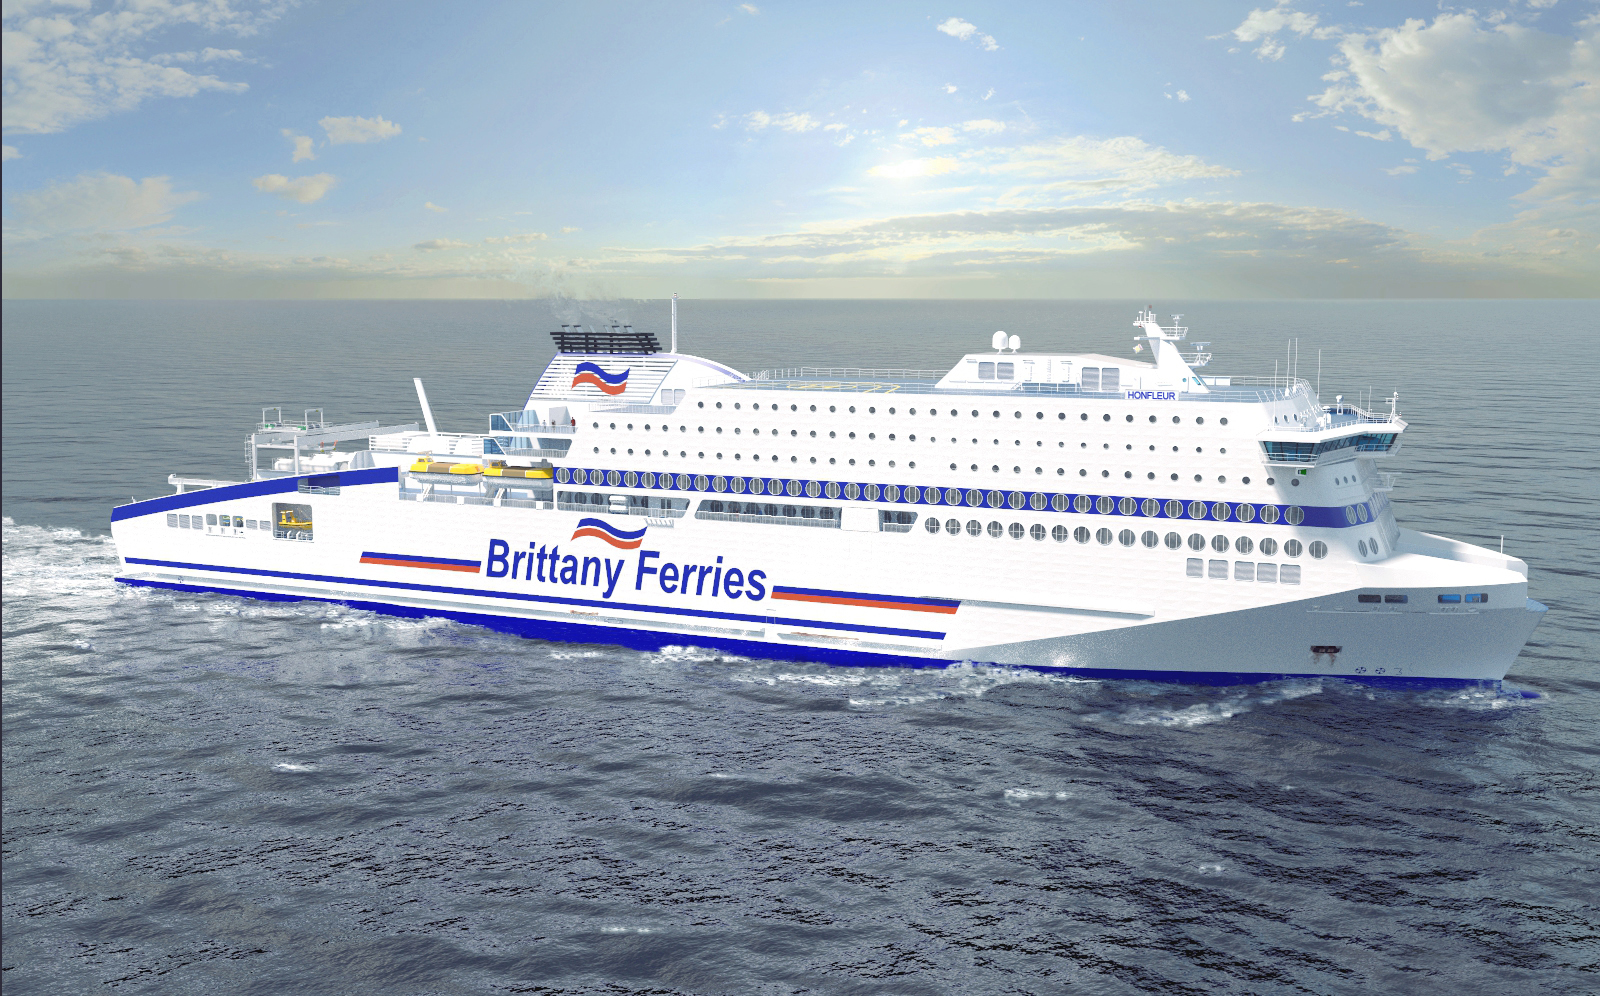 Total Lubmarine and Total Marine Fuels Global Solution to supply new Brittany Ferries vessel Honfleur